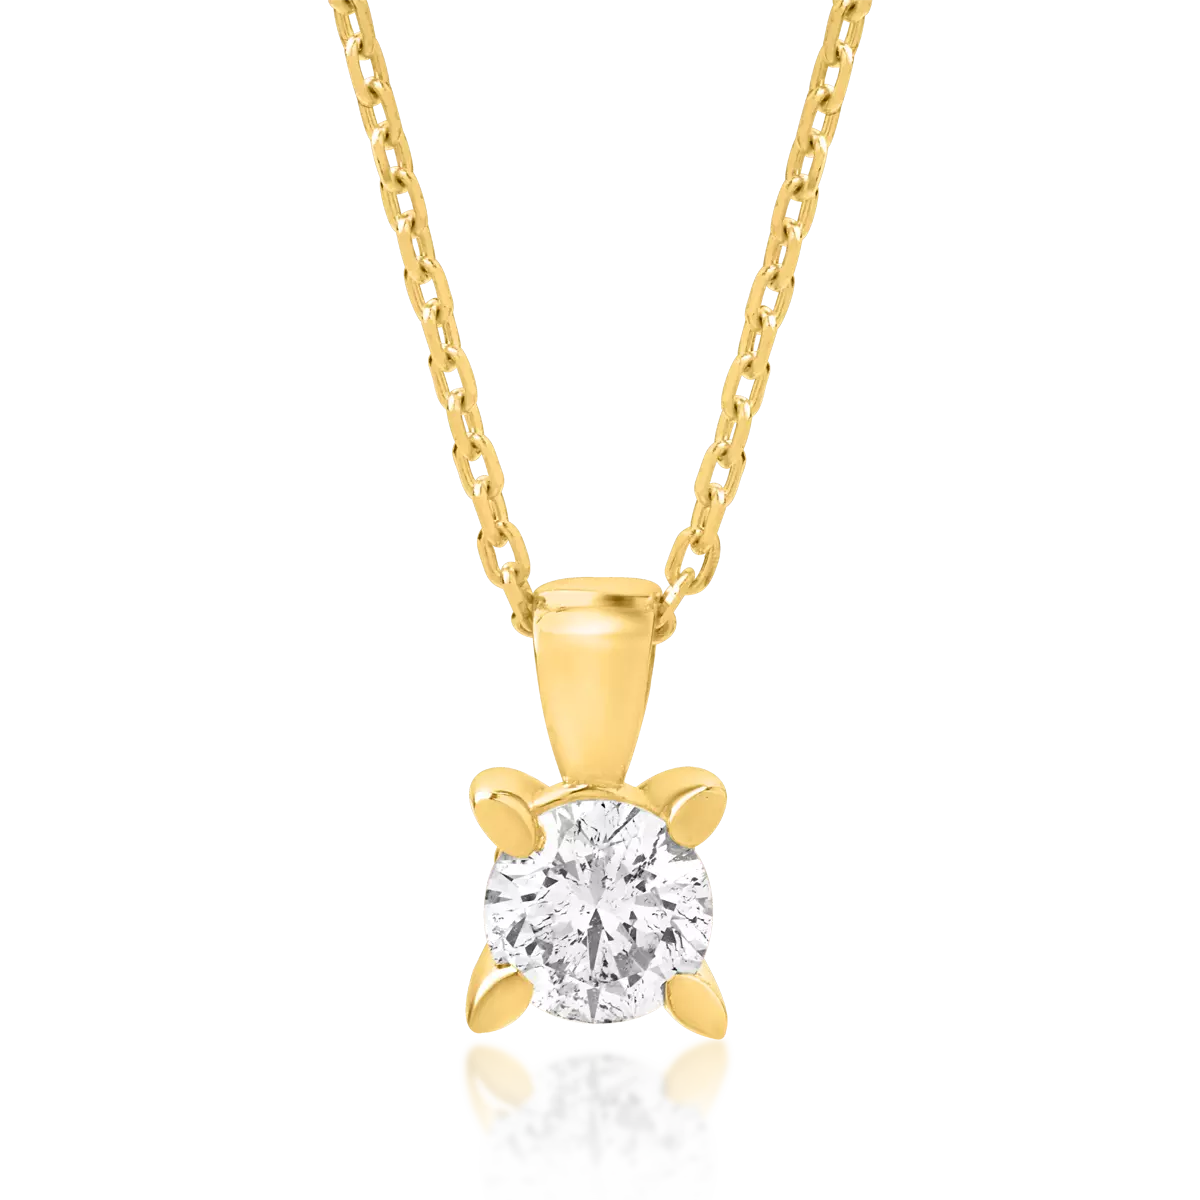 18K yellow gold necklace with pendant with diamond of 0.15ct